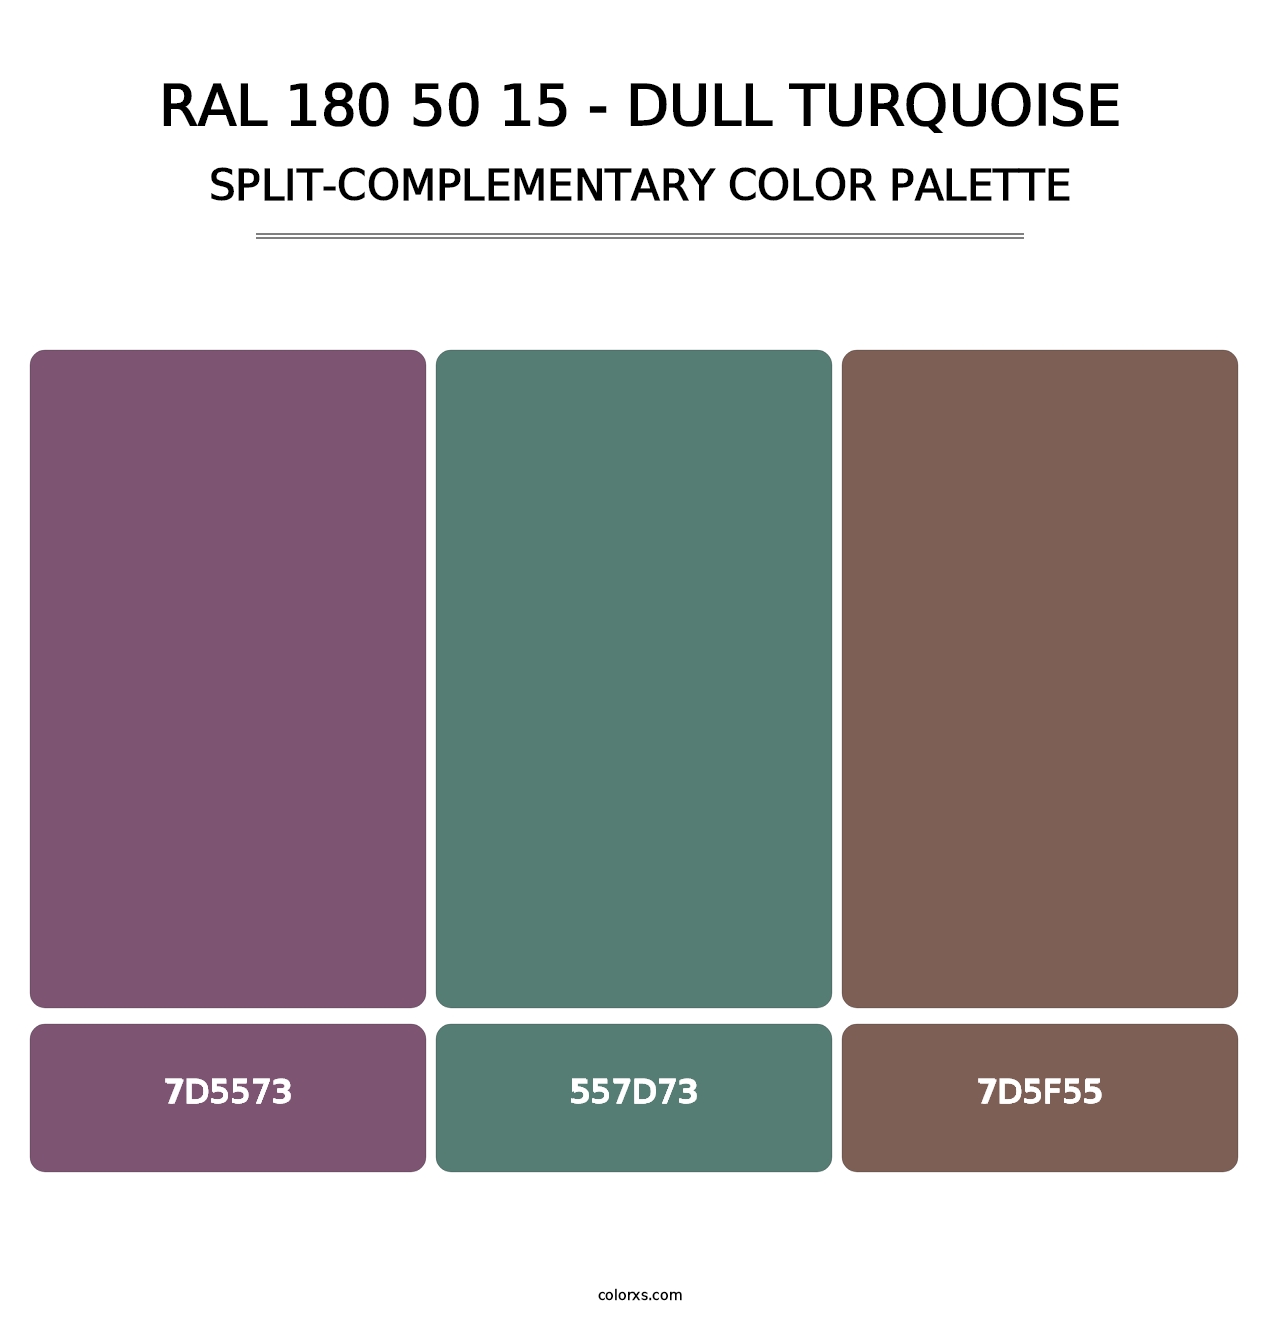 RAL 180 50 15 - Dull Turquoise - Split-Complementary Color Palette